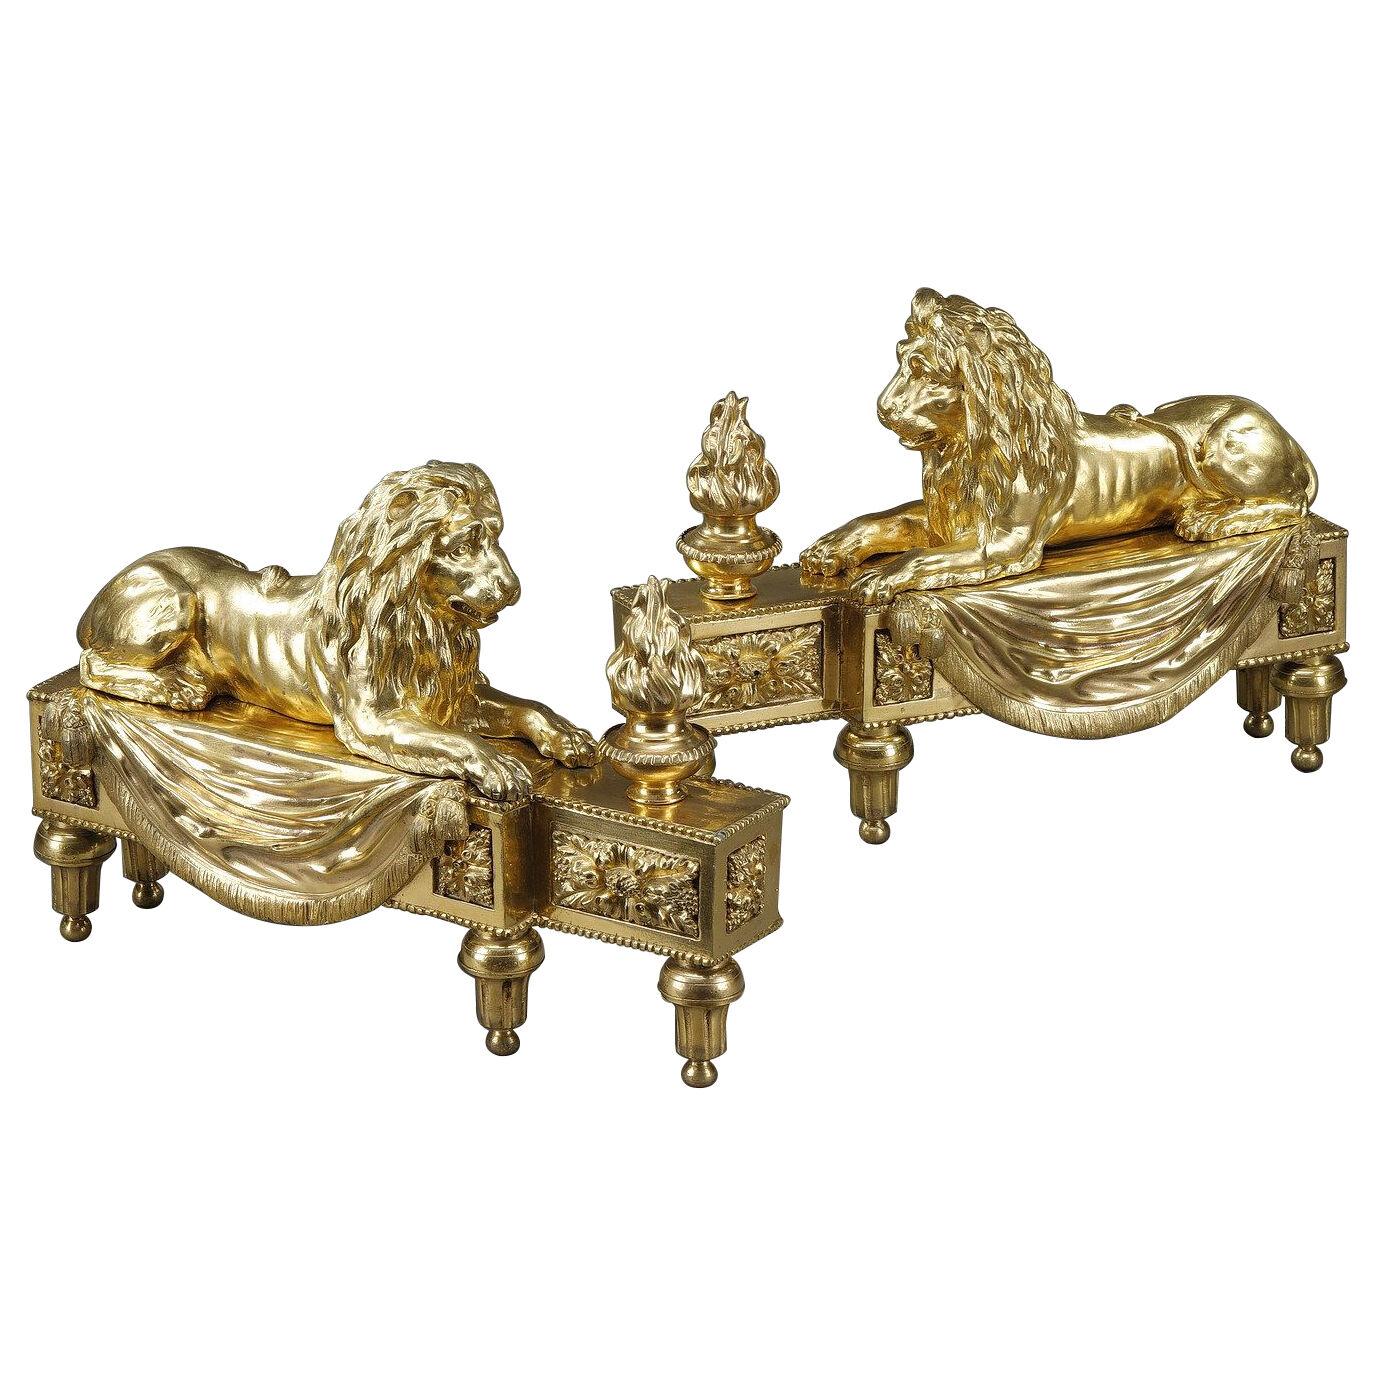 Pair of andirons with lions in gilded and chiseled bronze